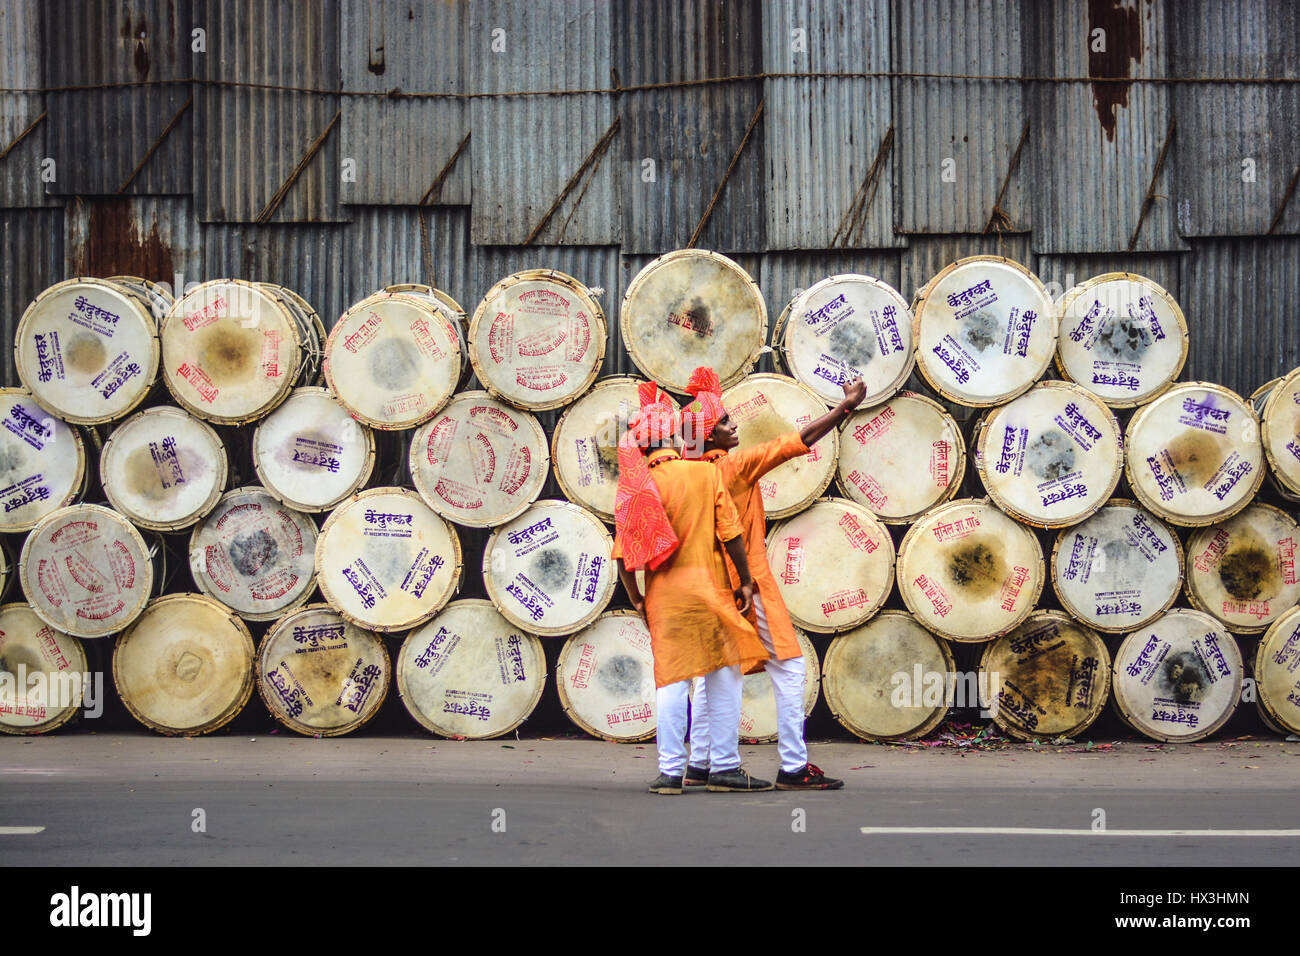 Drummers dressed in traditional indian outfits taking a selfie with large drums in the background (Nasik Dhols) just before the performance. Stock Photo